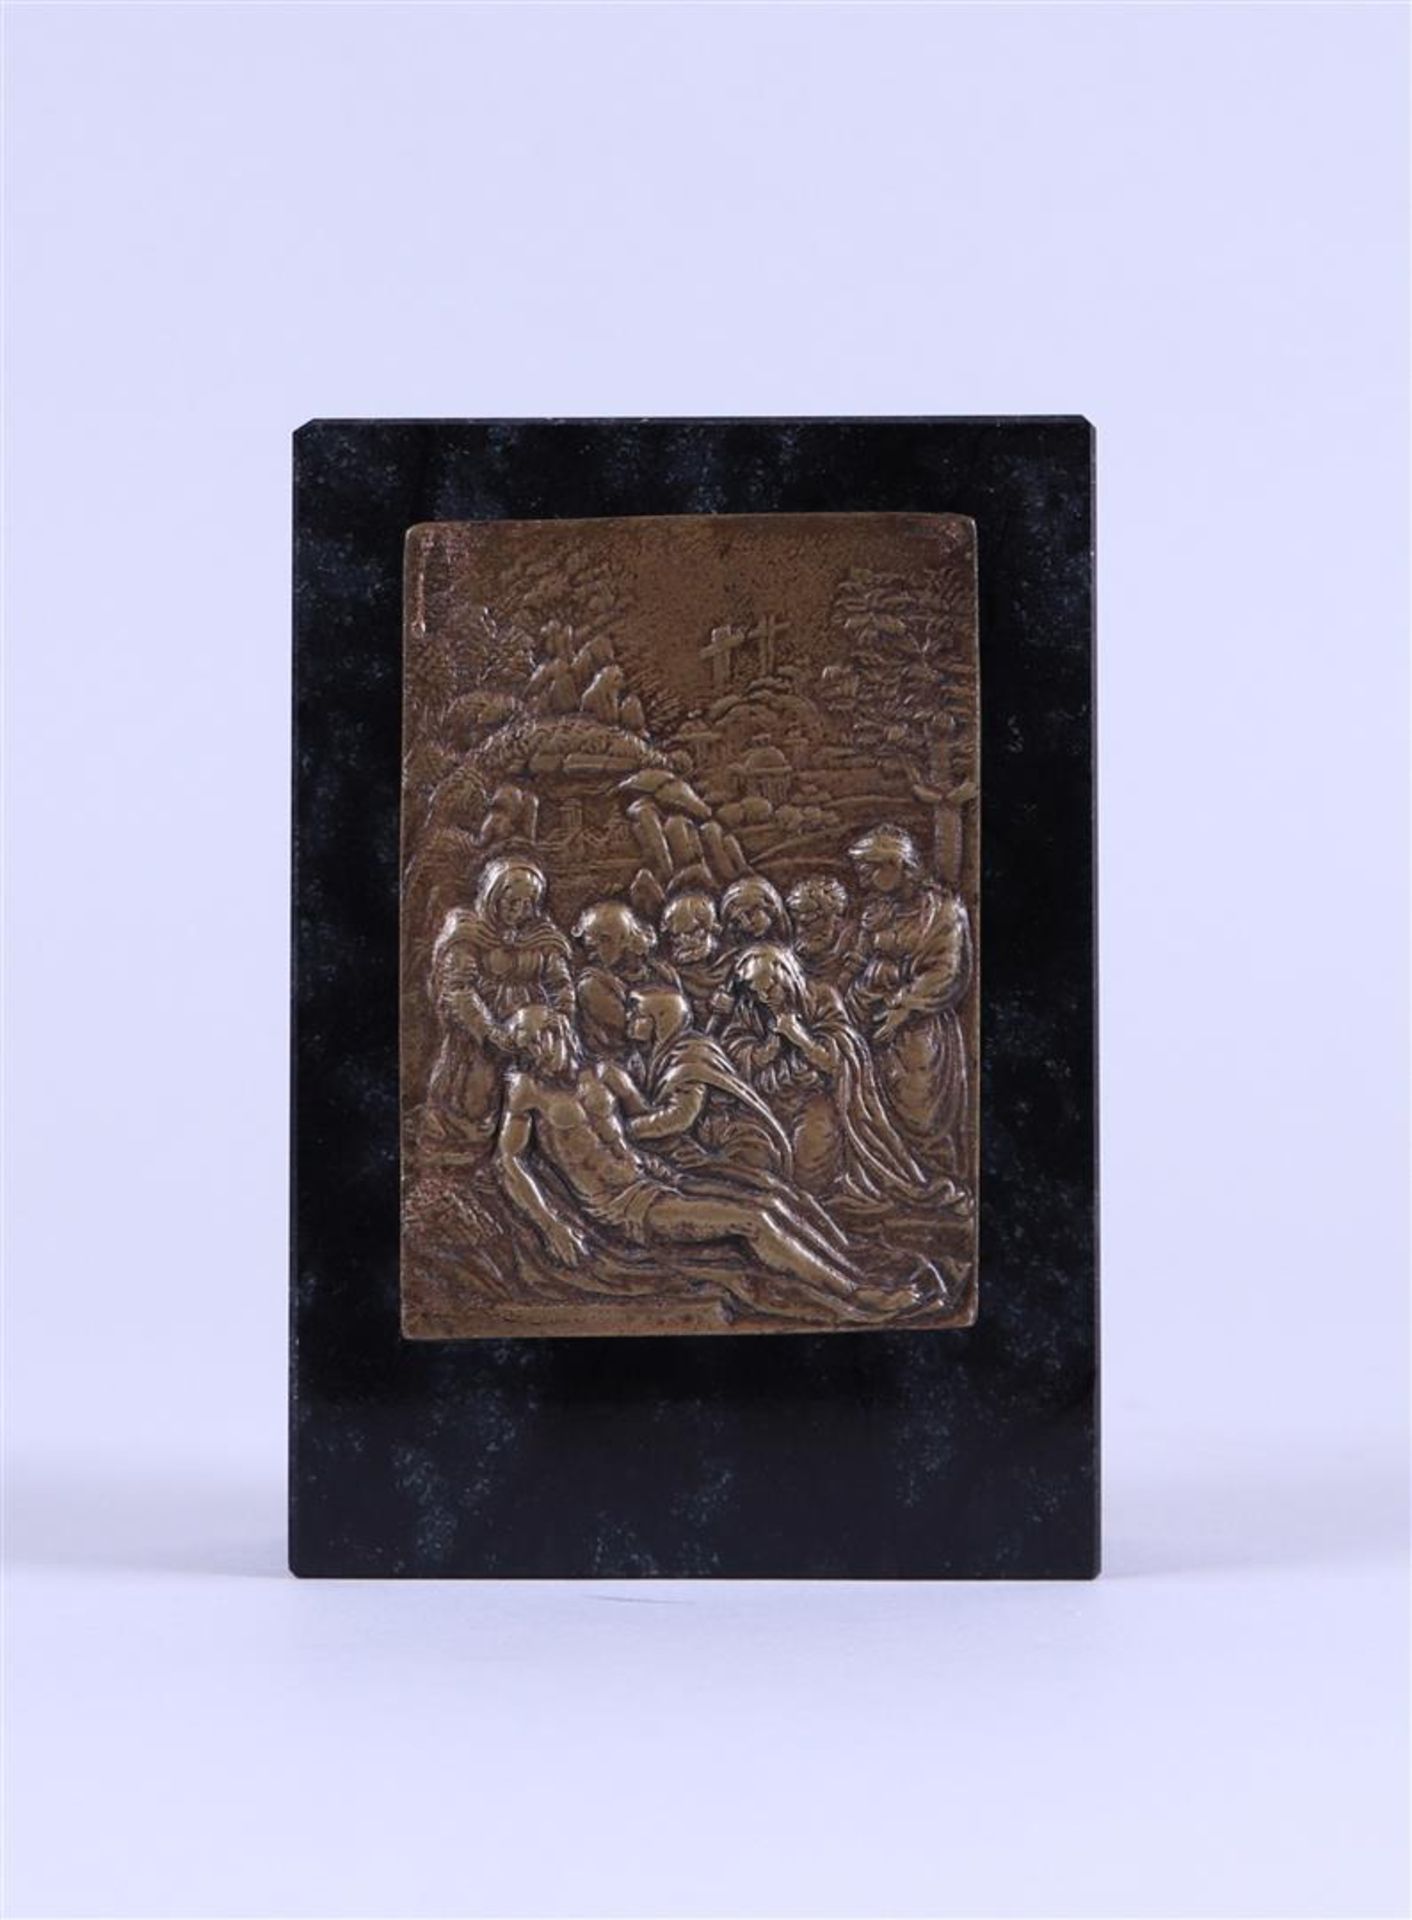 A bronze relief depicting the entombment of Christ mounted on a honed marble base
